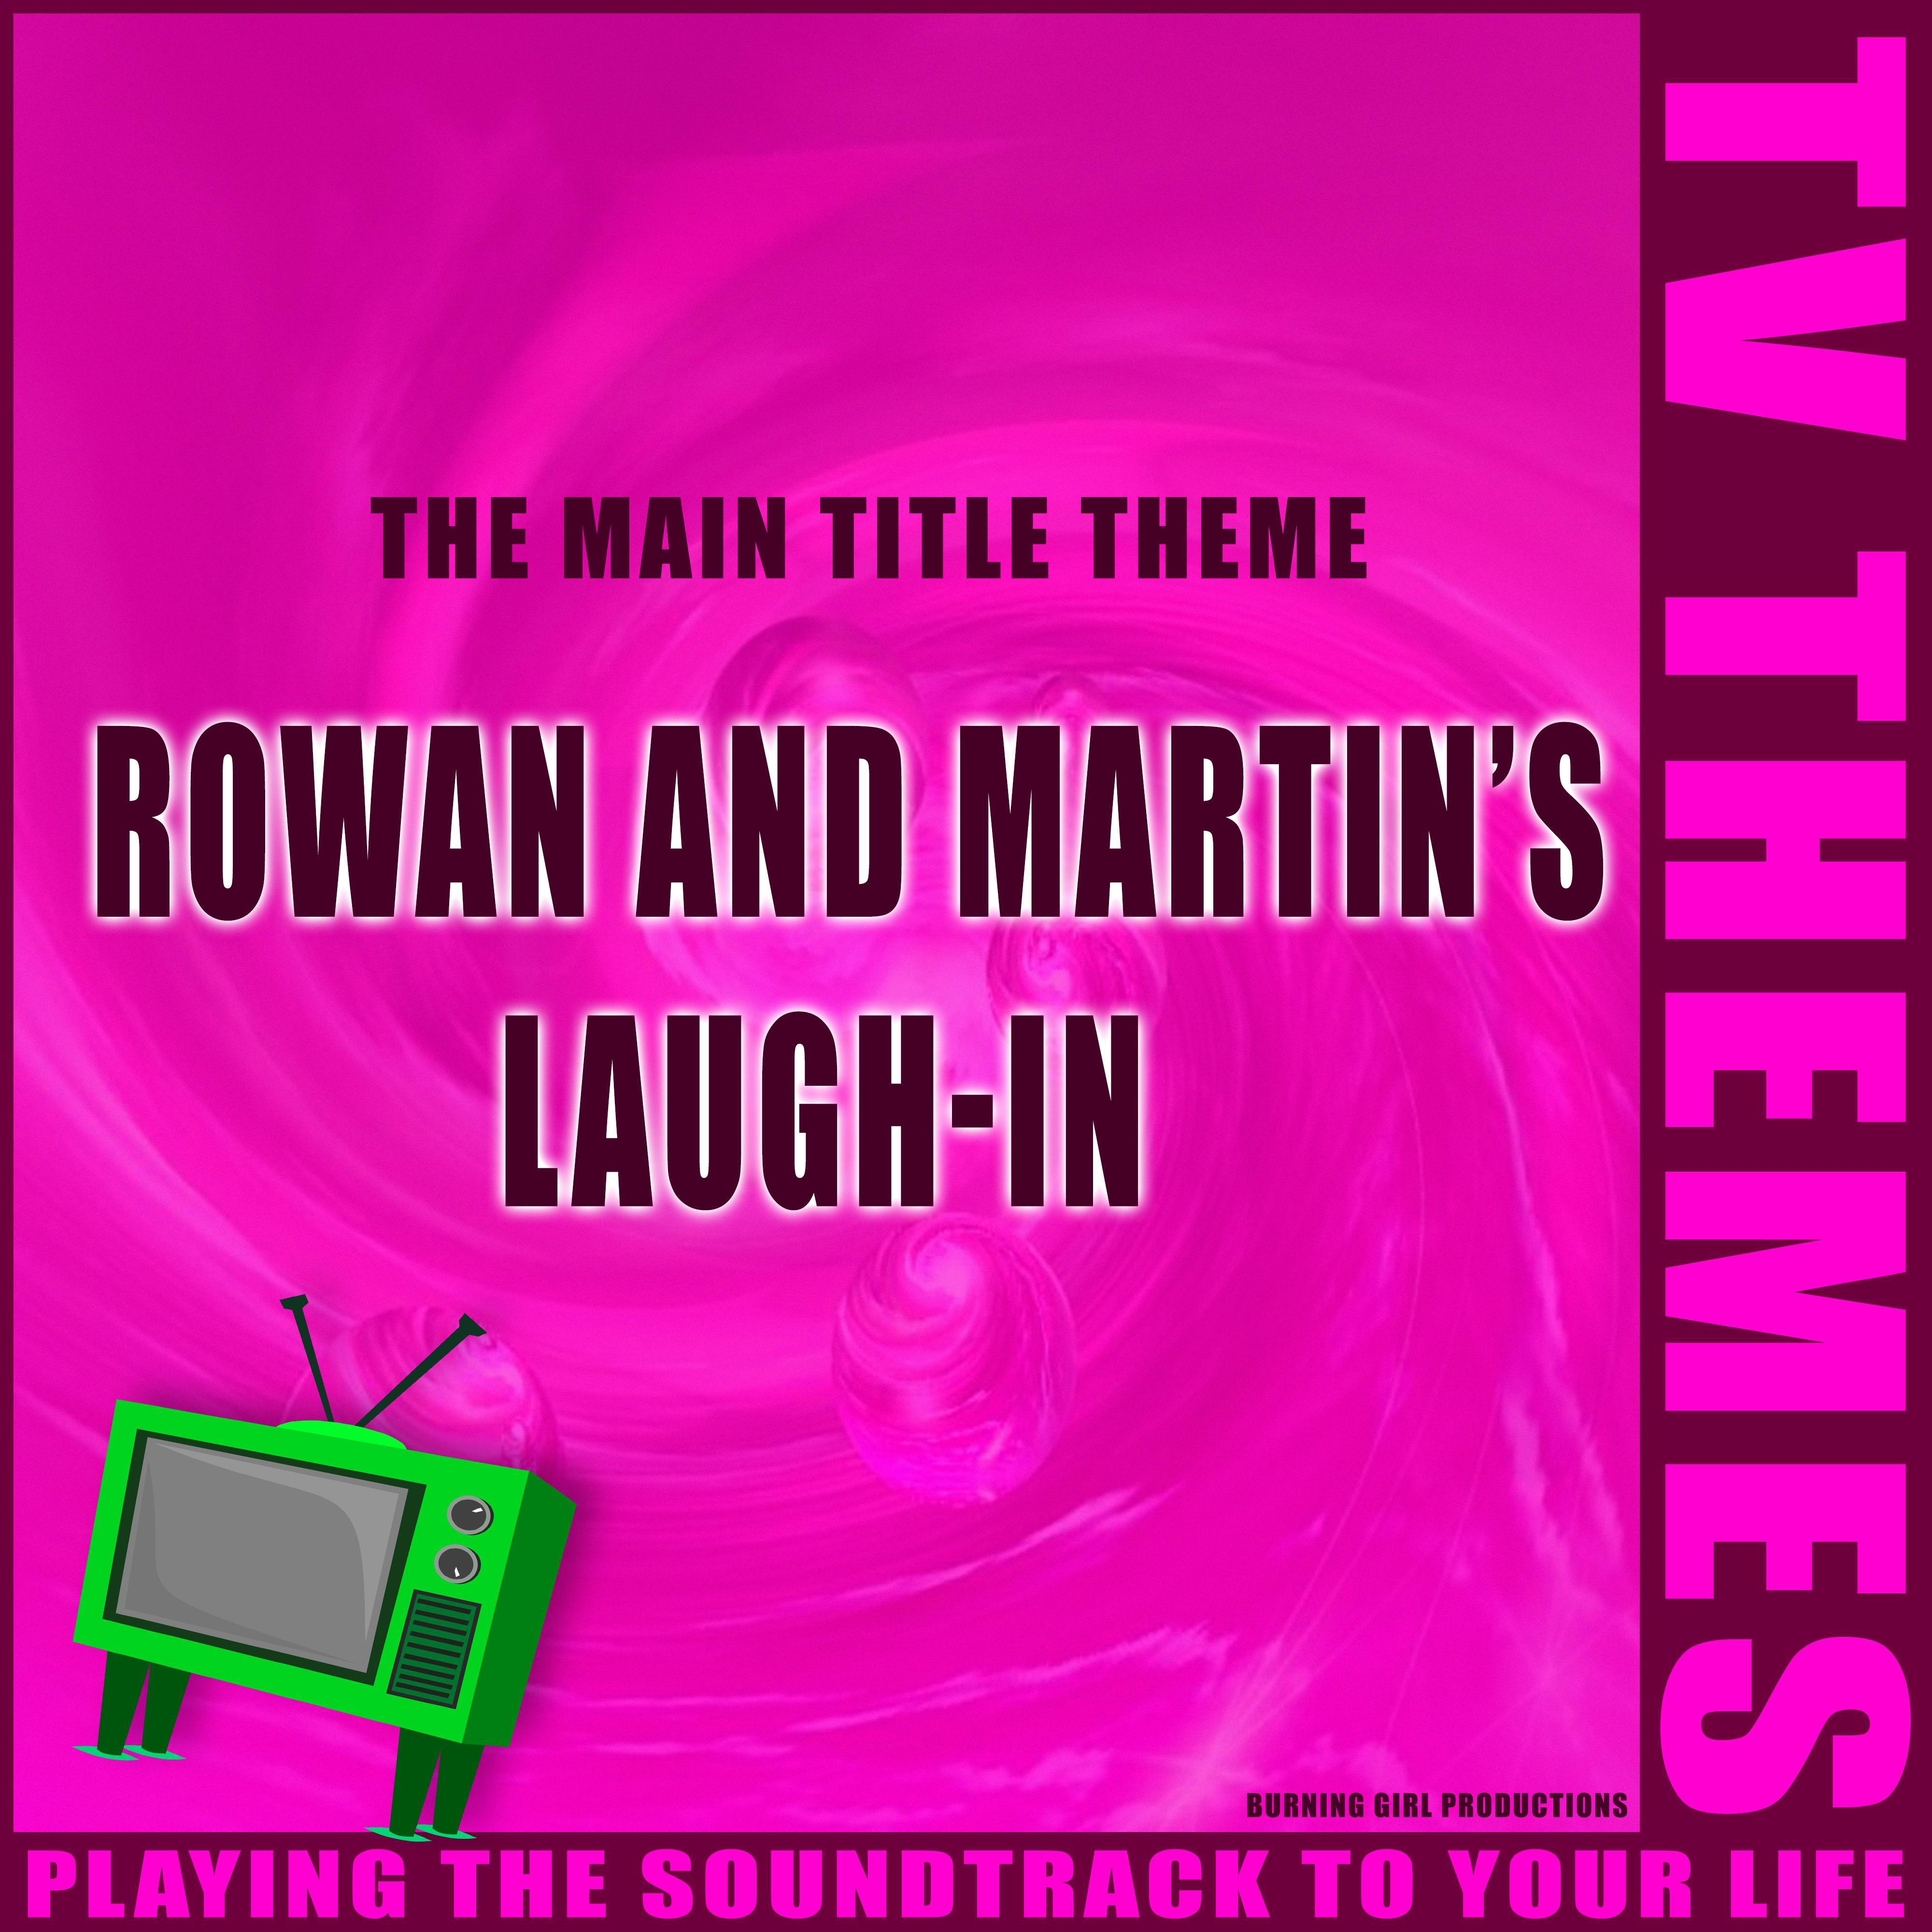 Rowan and Martin's Laugh-In - The Main Title Theme